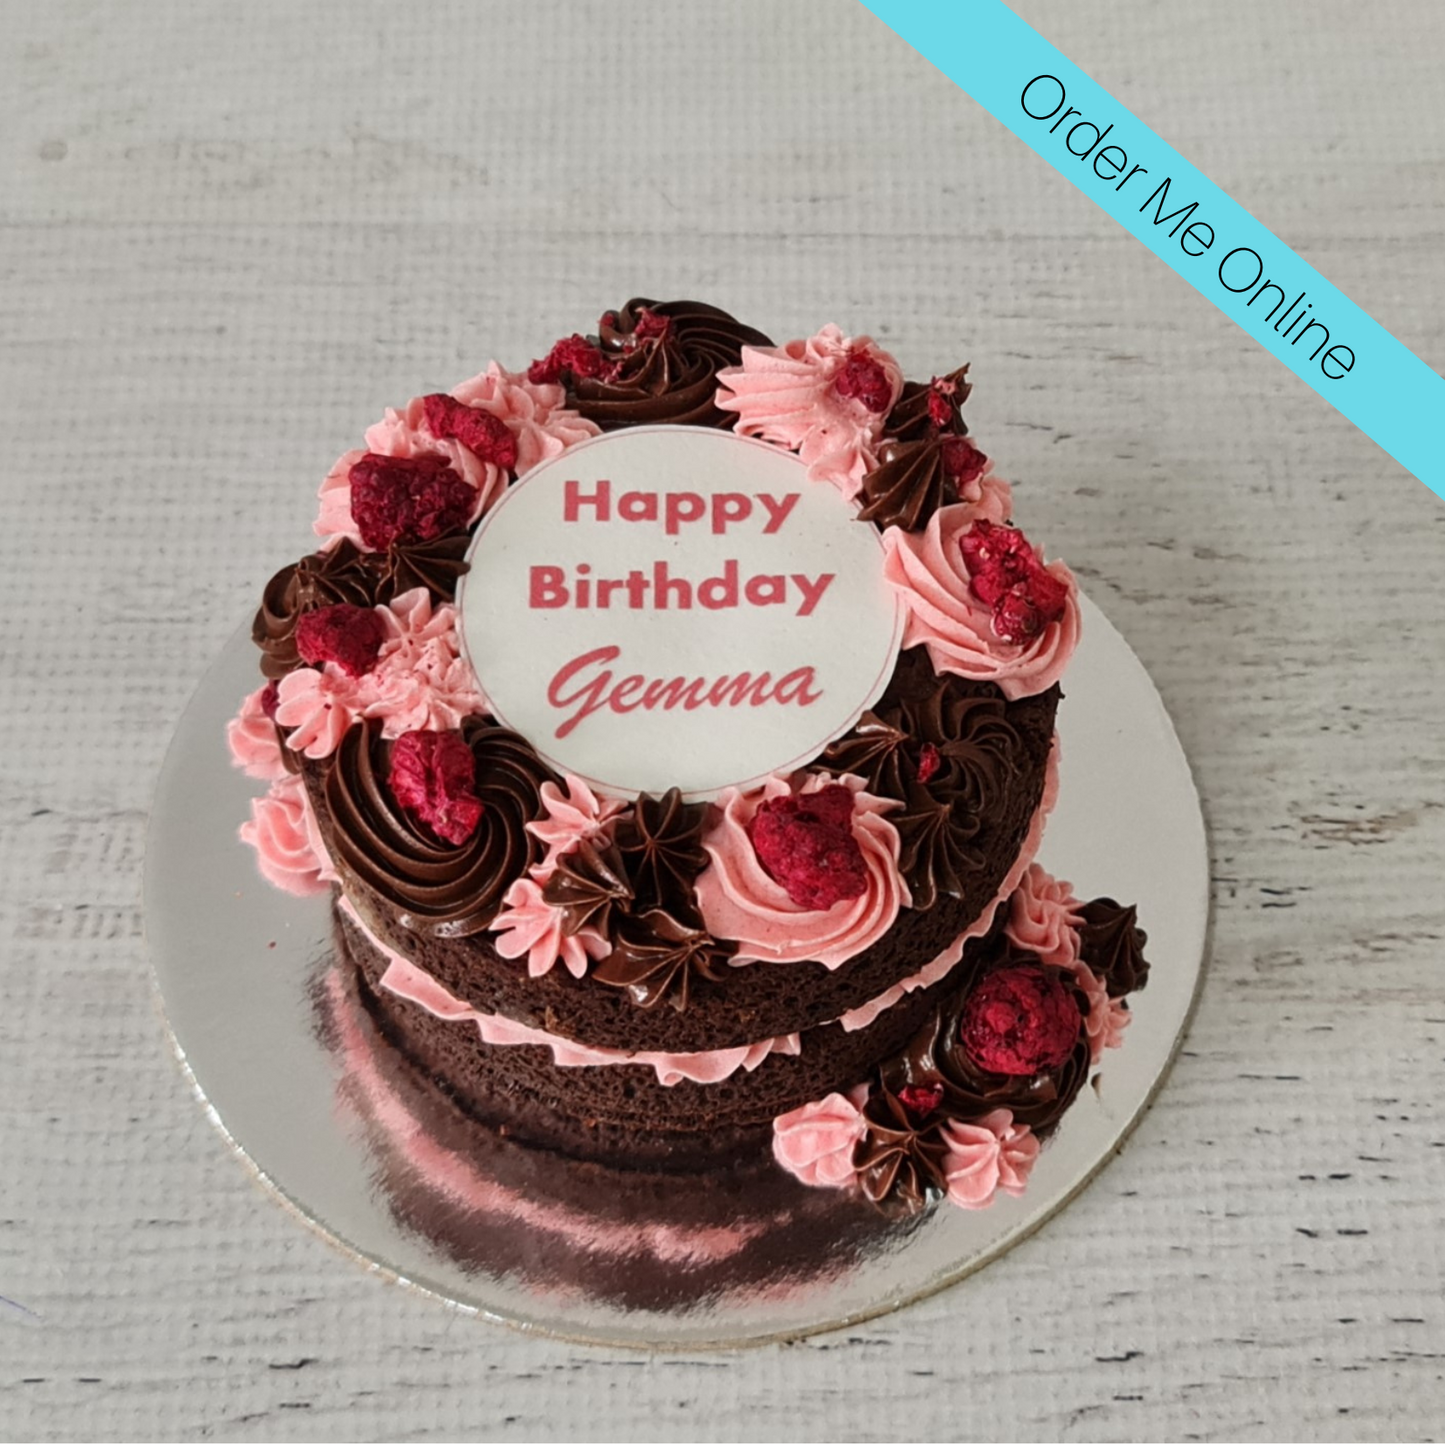 Auckland Cake Makers - Bespoke Cakes and Sweet Treats